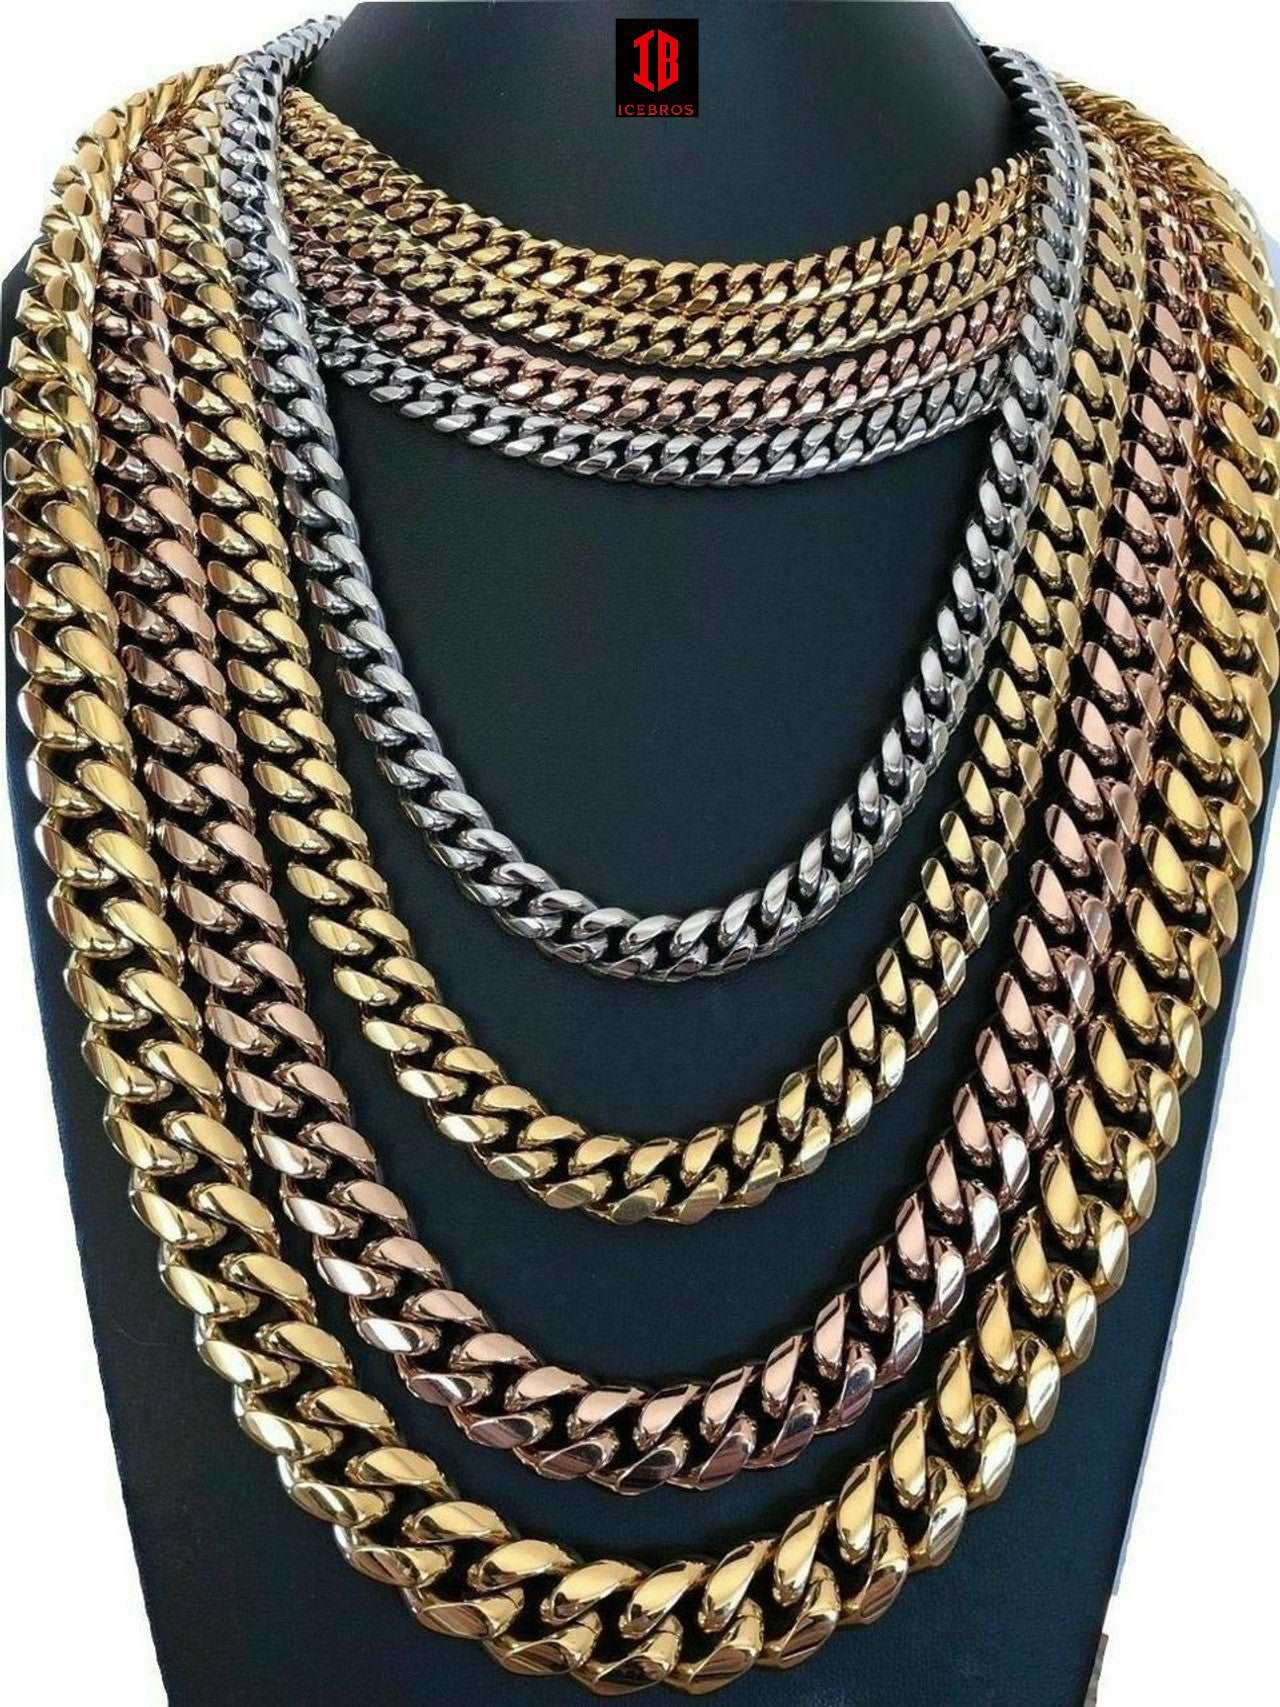 (8MM) Mens Miami Cuban Link Chain - Gold Plated Stainless Steel 8-18mm Yellow/Rose/White